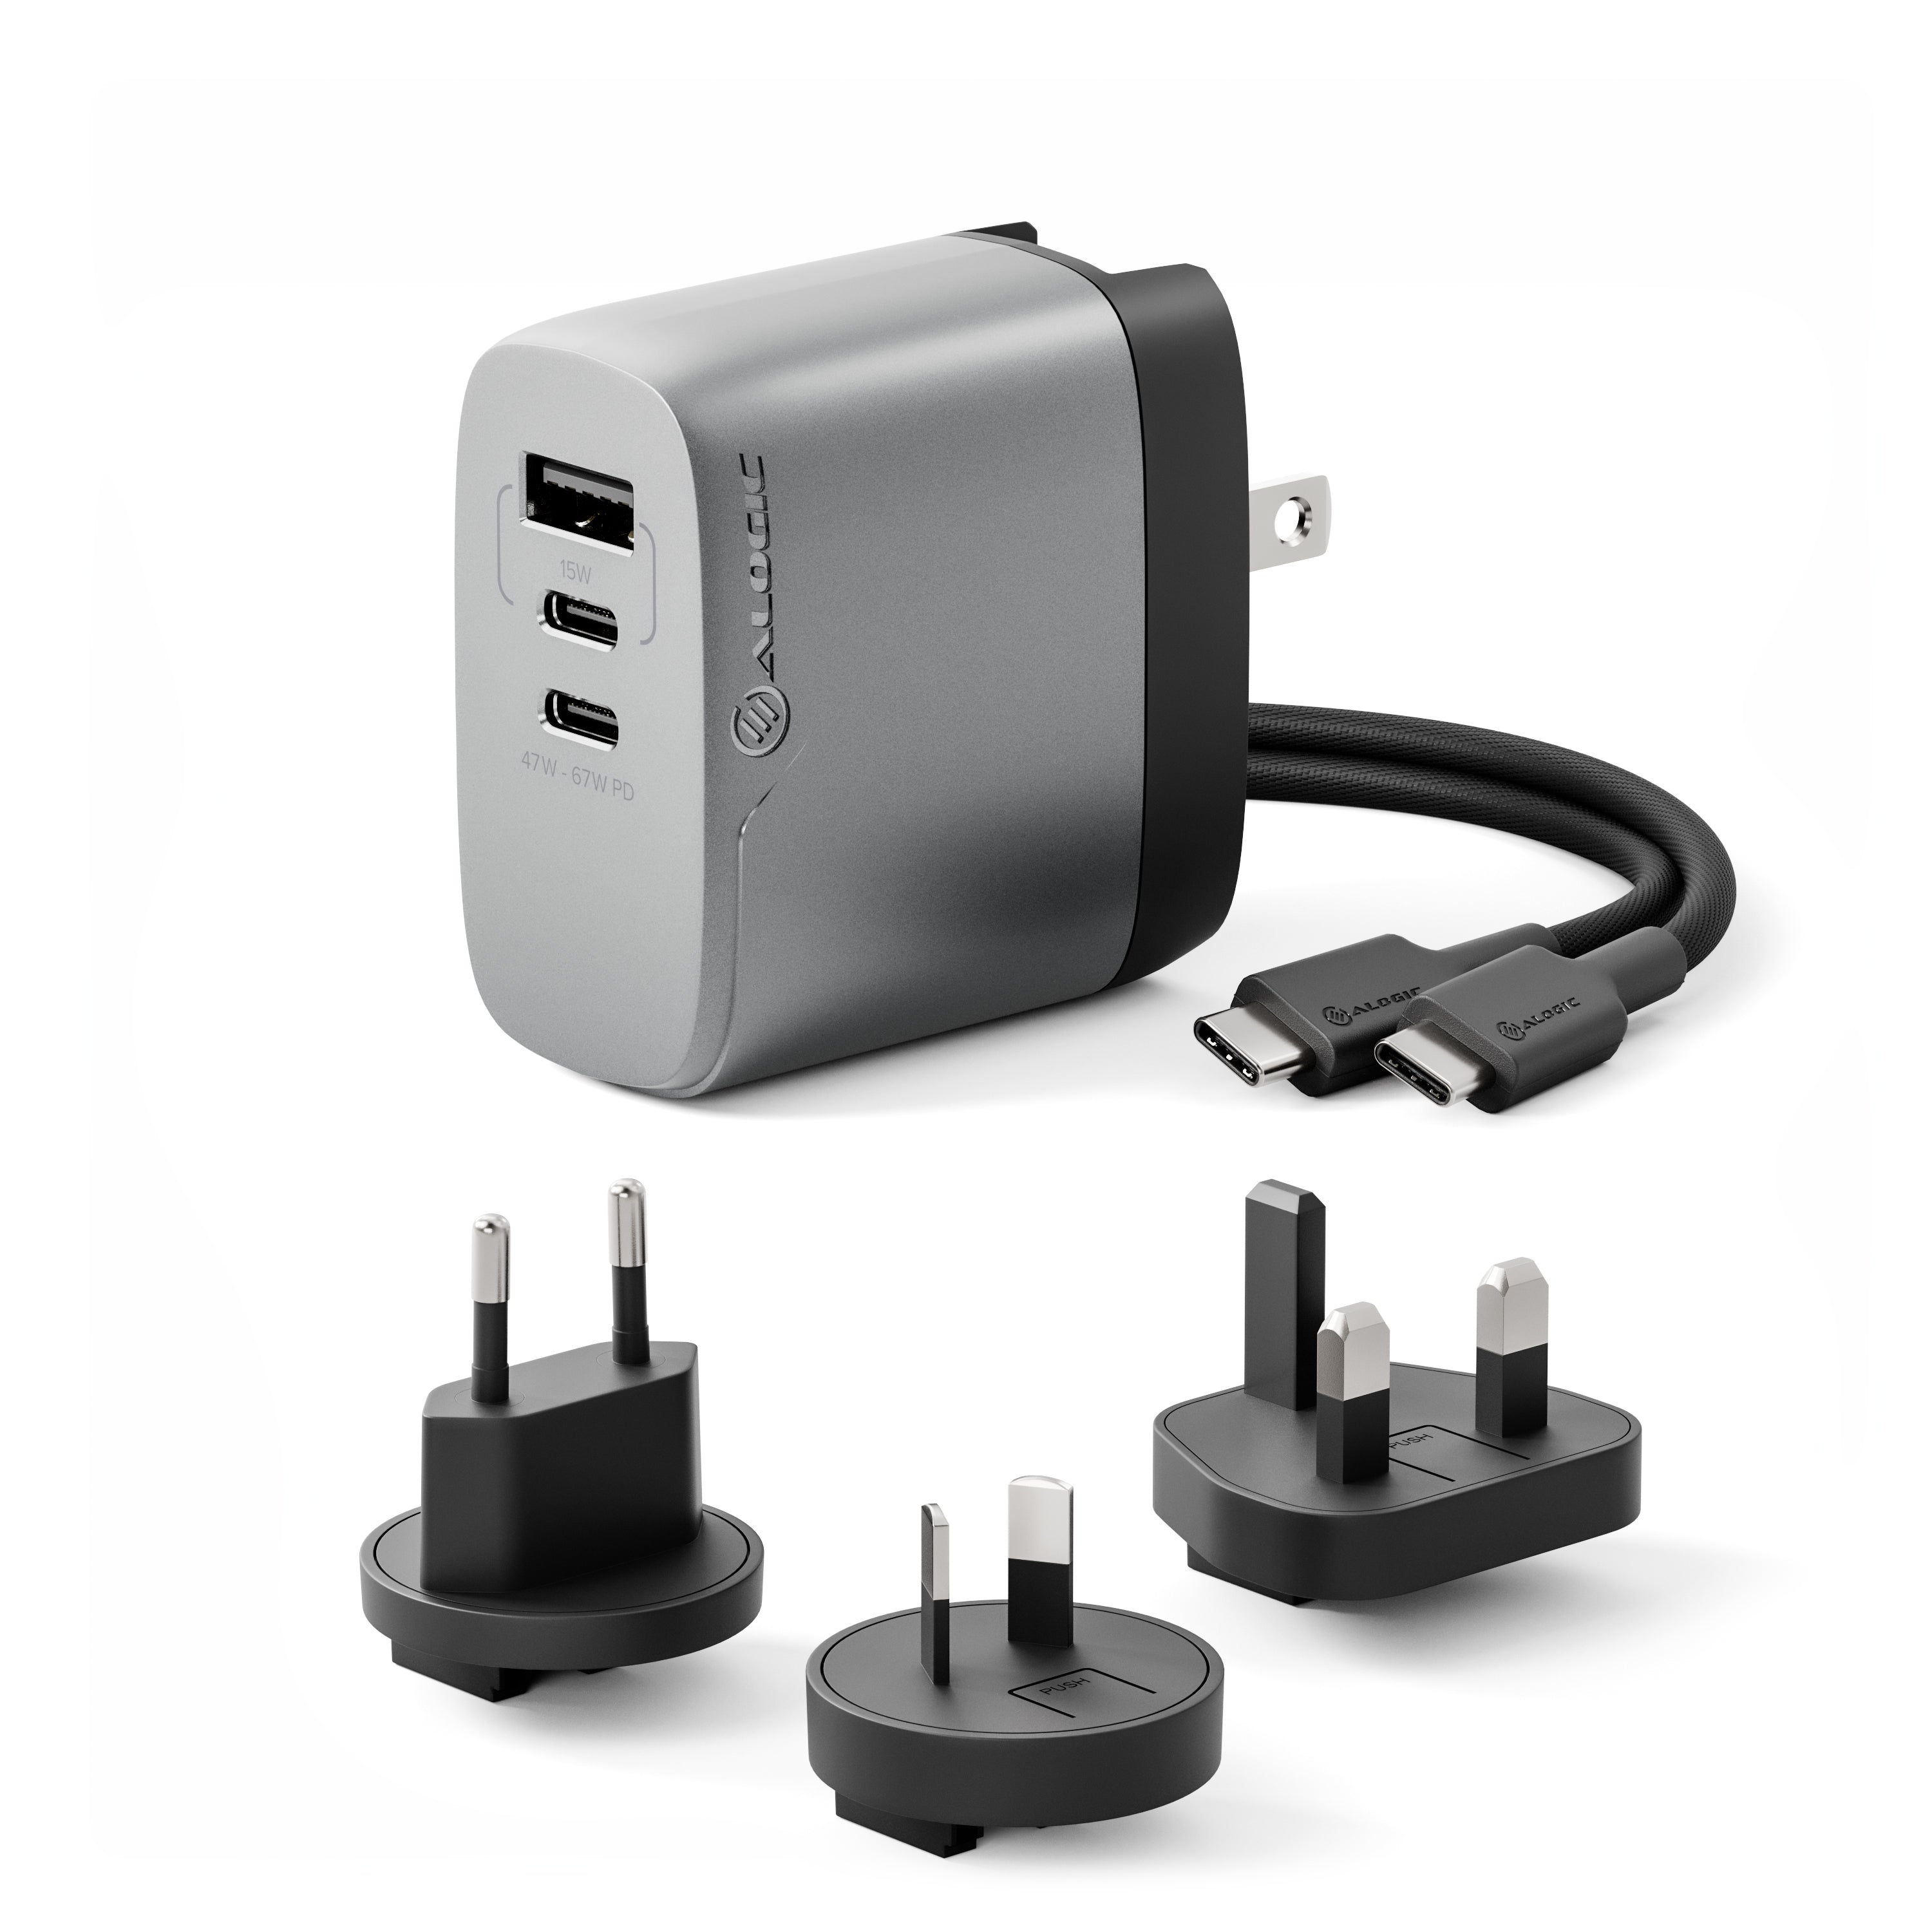 3x67-rapid-power-67w-multi-country-travel-gan-charger_1